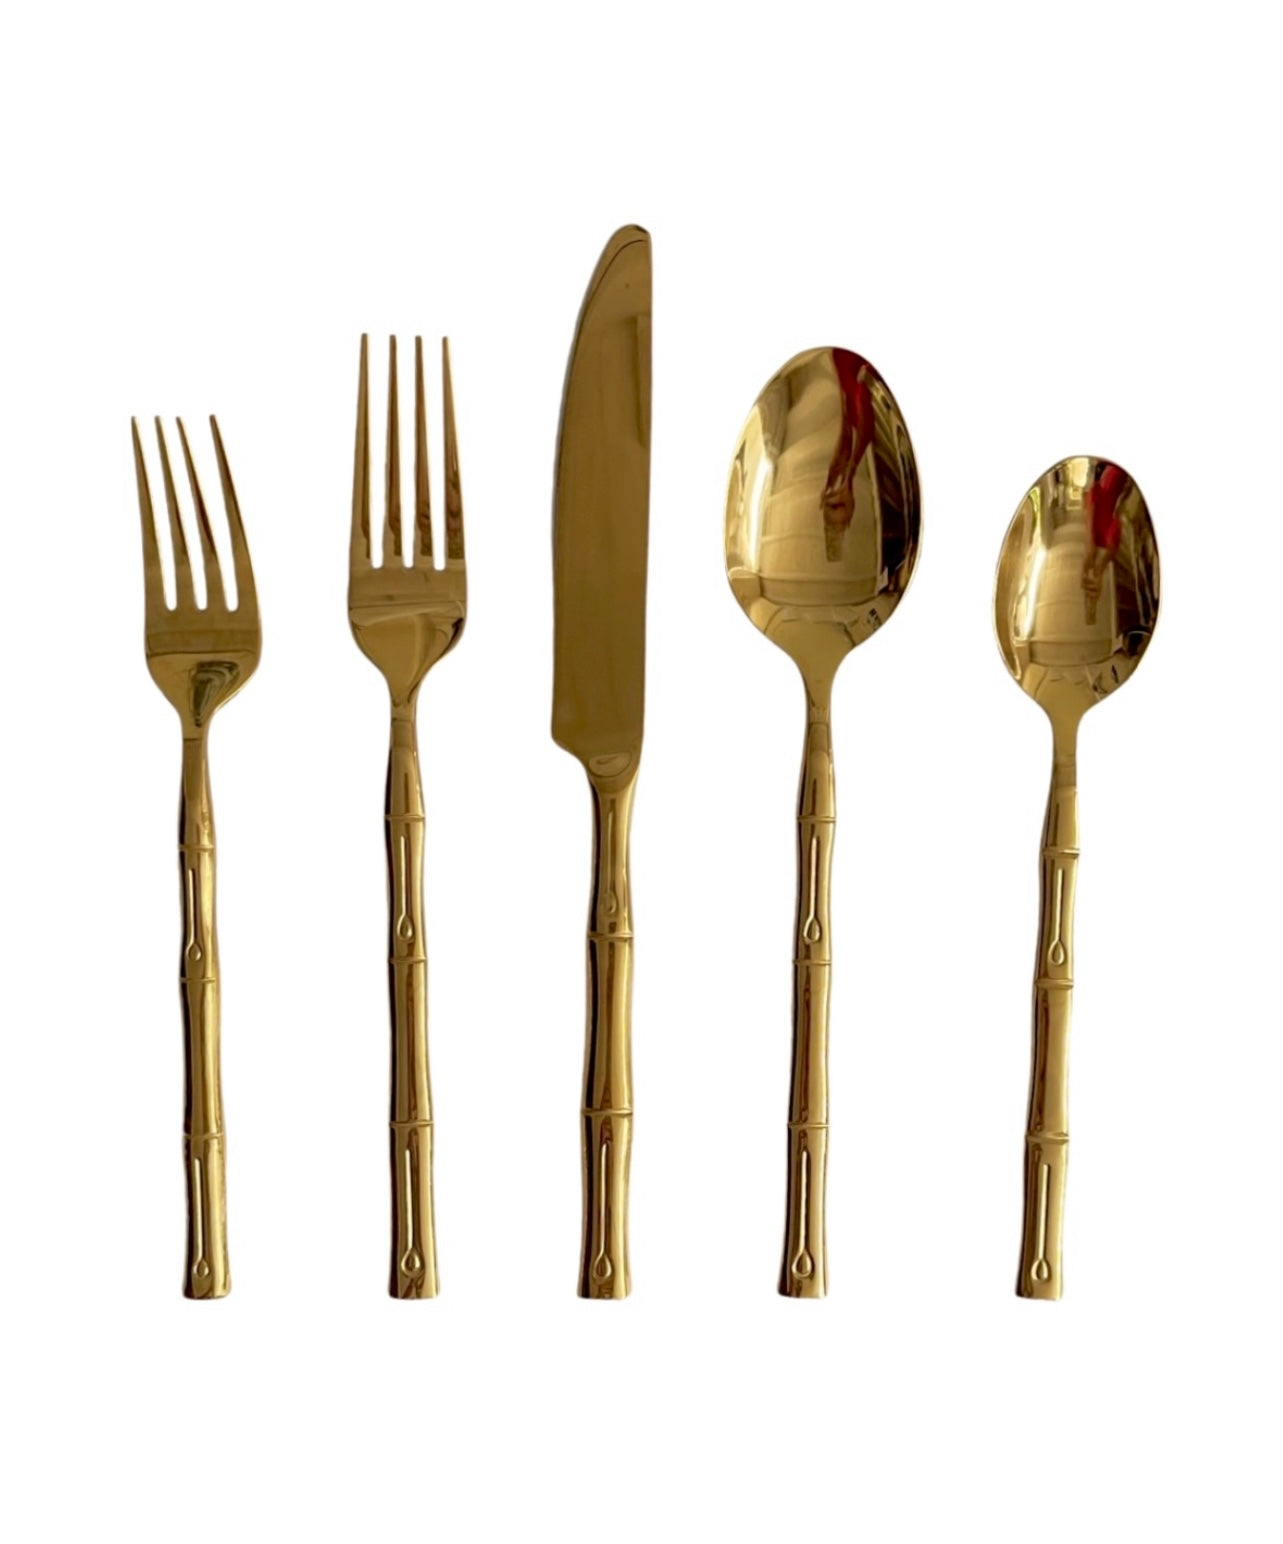 5 Piece Stainless Steel Gold Coloured Bamboo Cutlery Set